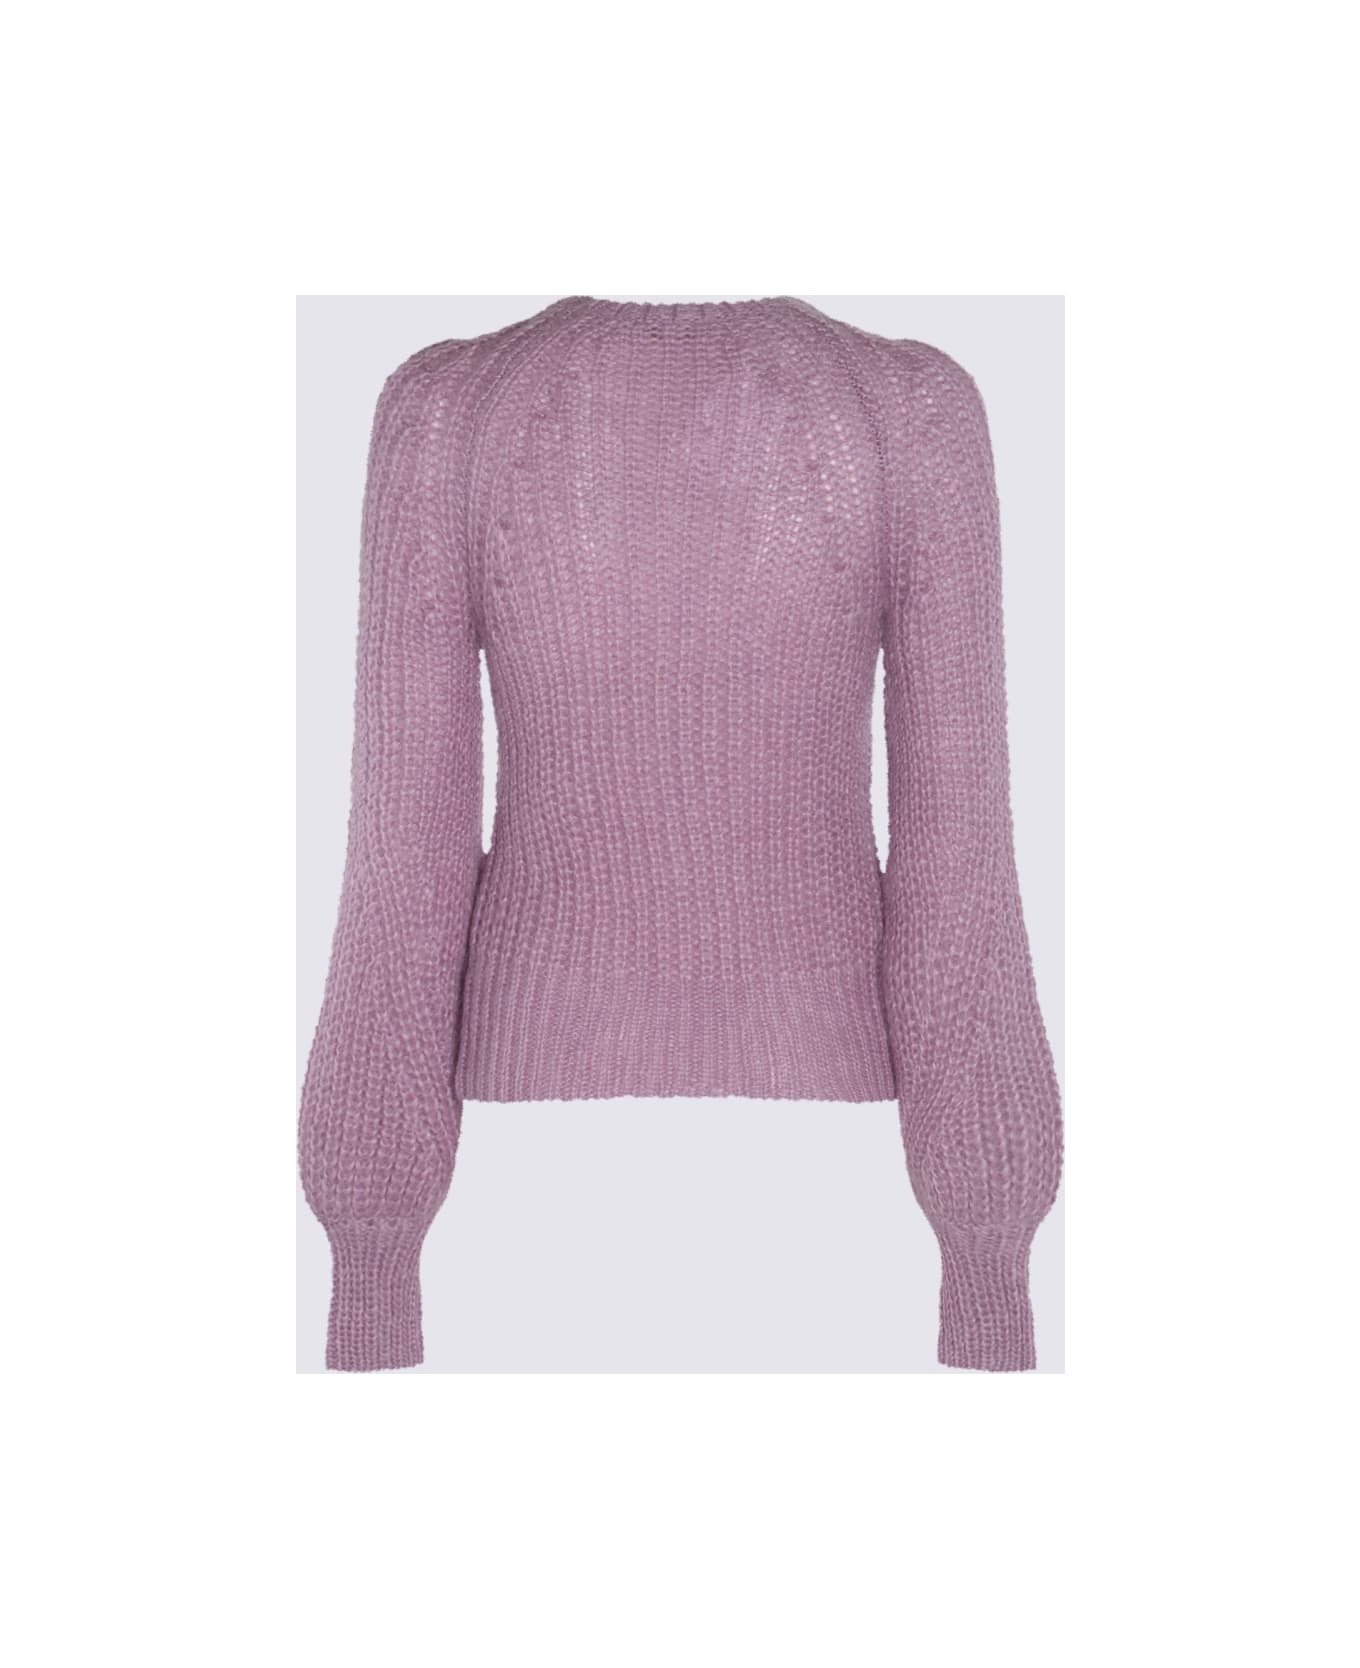 Zimmermann Dusty Lilac Mohair Blend Sweater - DUSTY LILAC ニットウェア